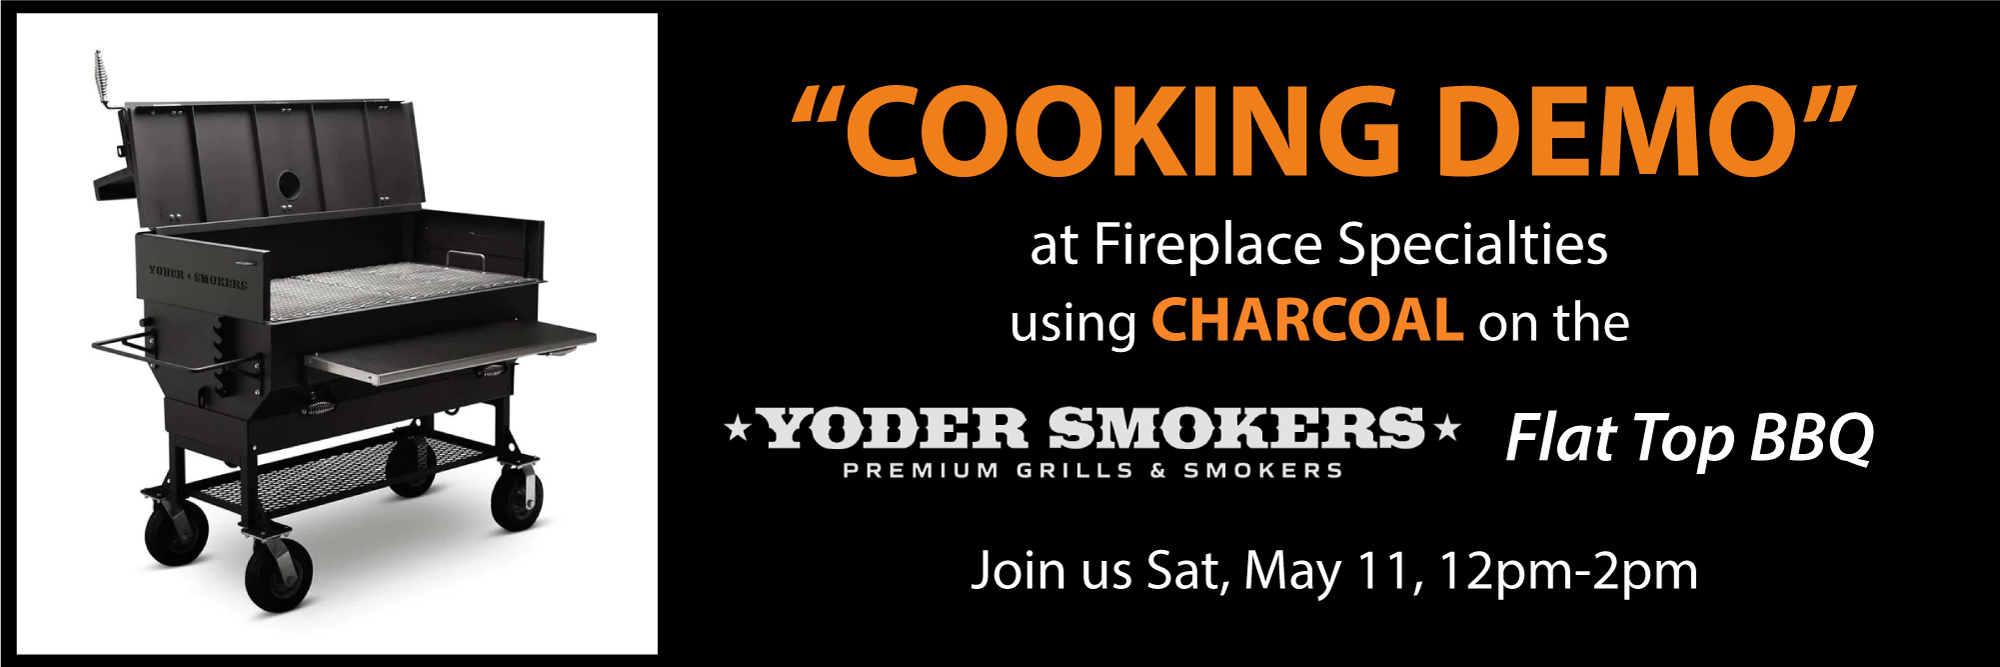 Cooking Demo of the Charcoal Yoder Smoker Flat Top BBQ! - Join us Sat, May 11, 12pm-2pm 